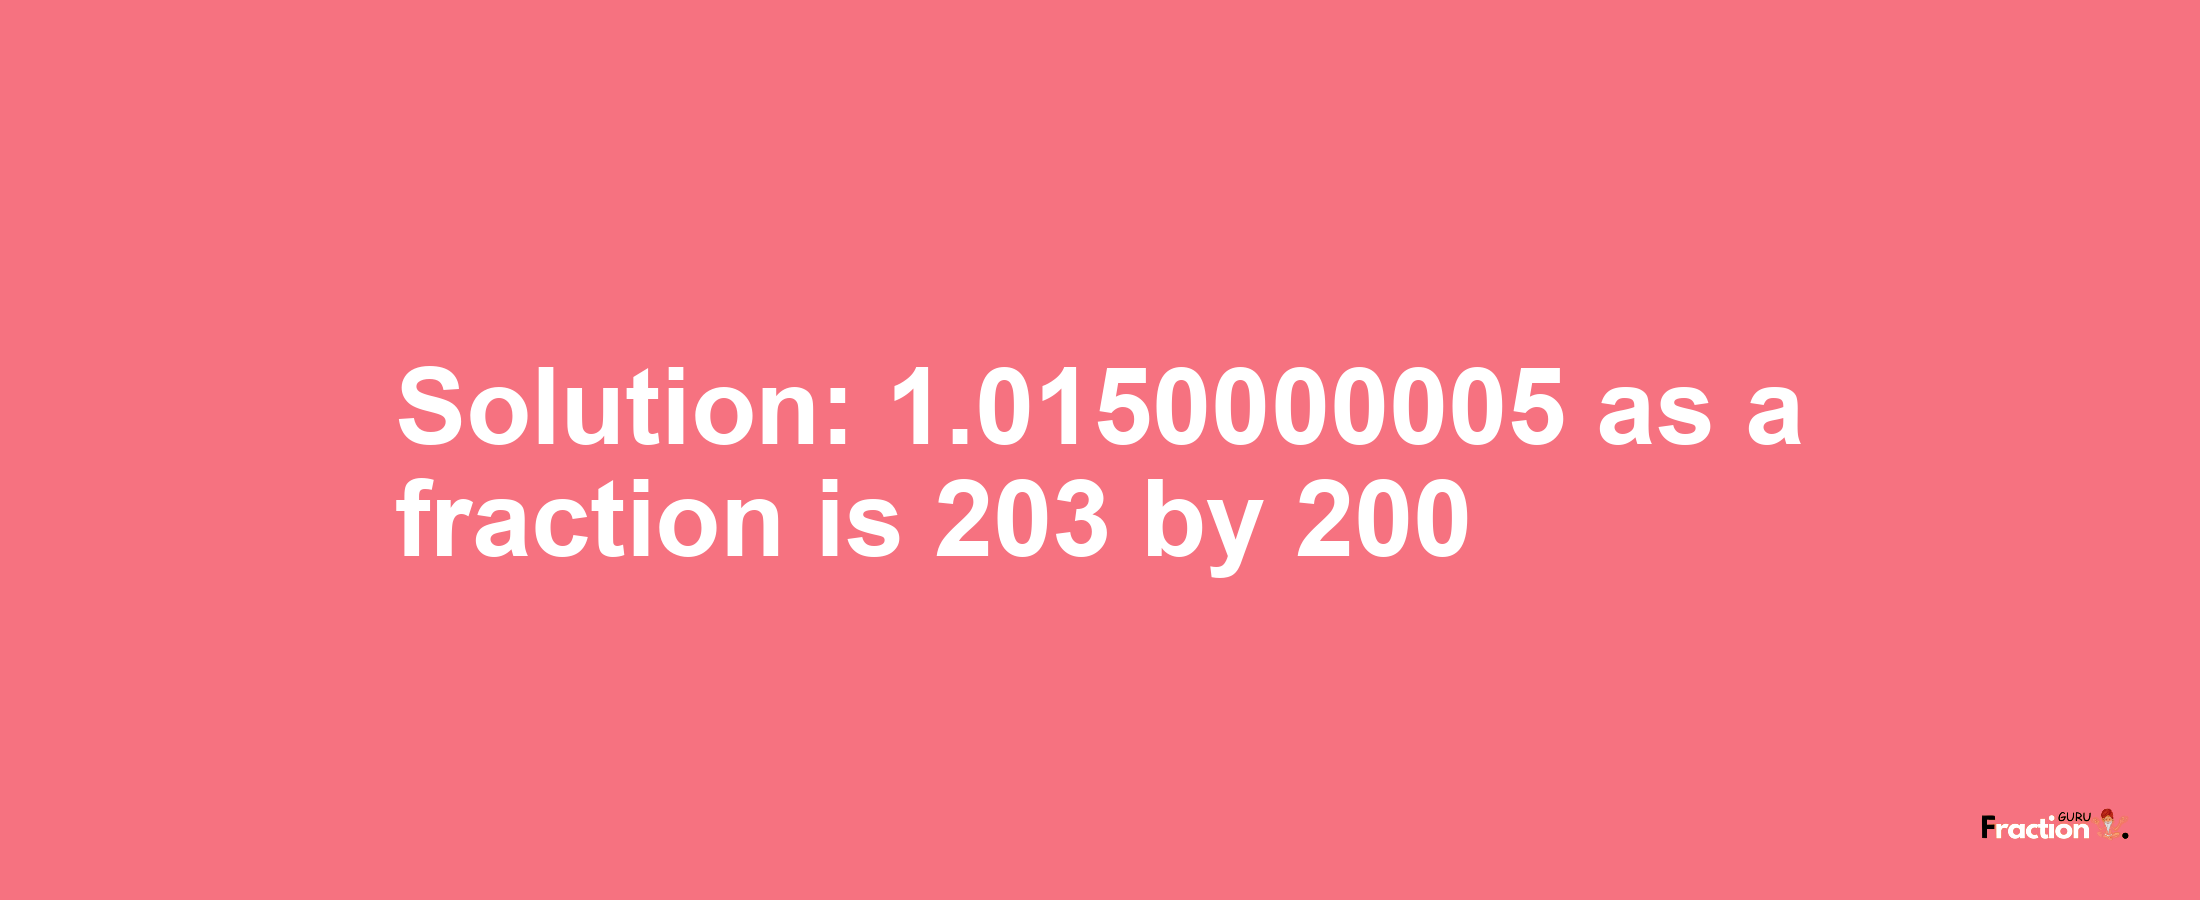 Solution:1.0150000005 as a fraction is 203/200